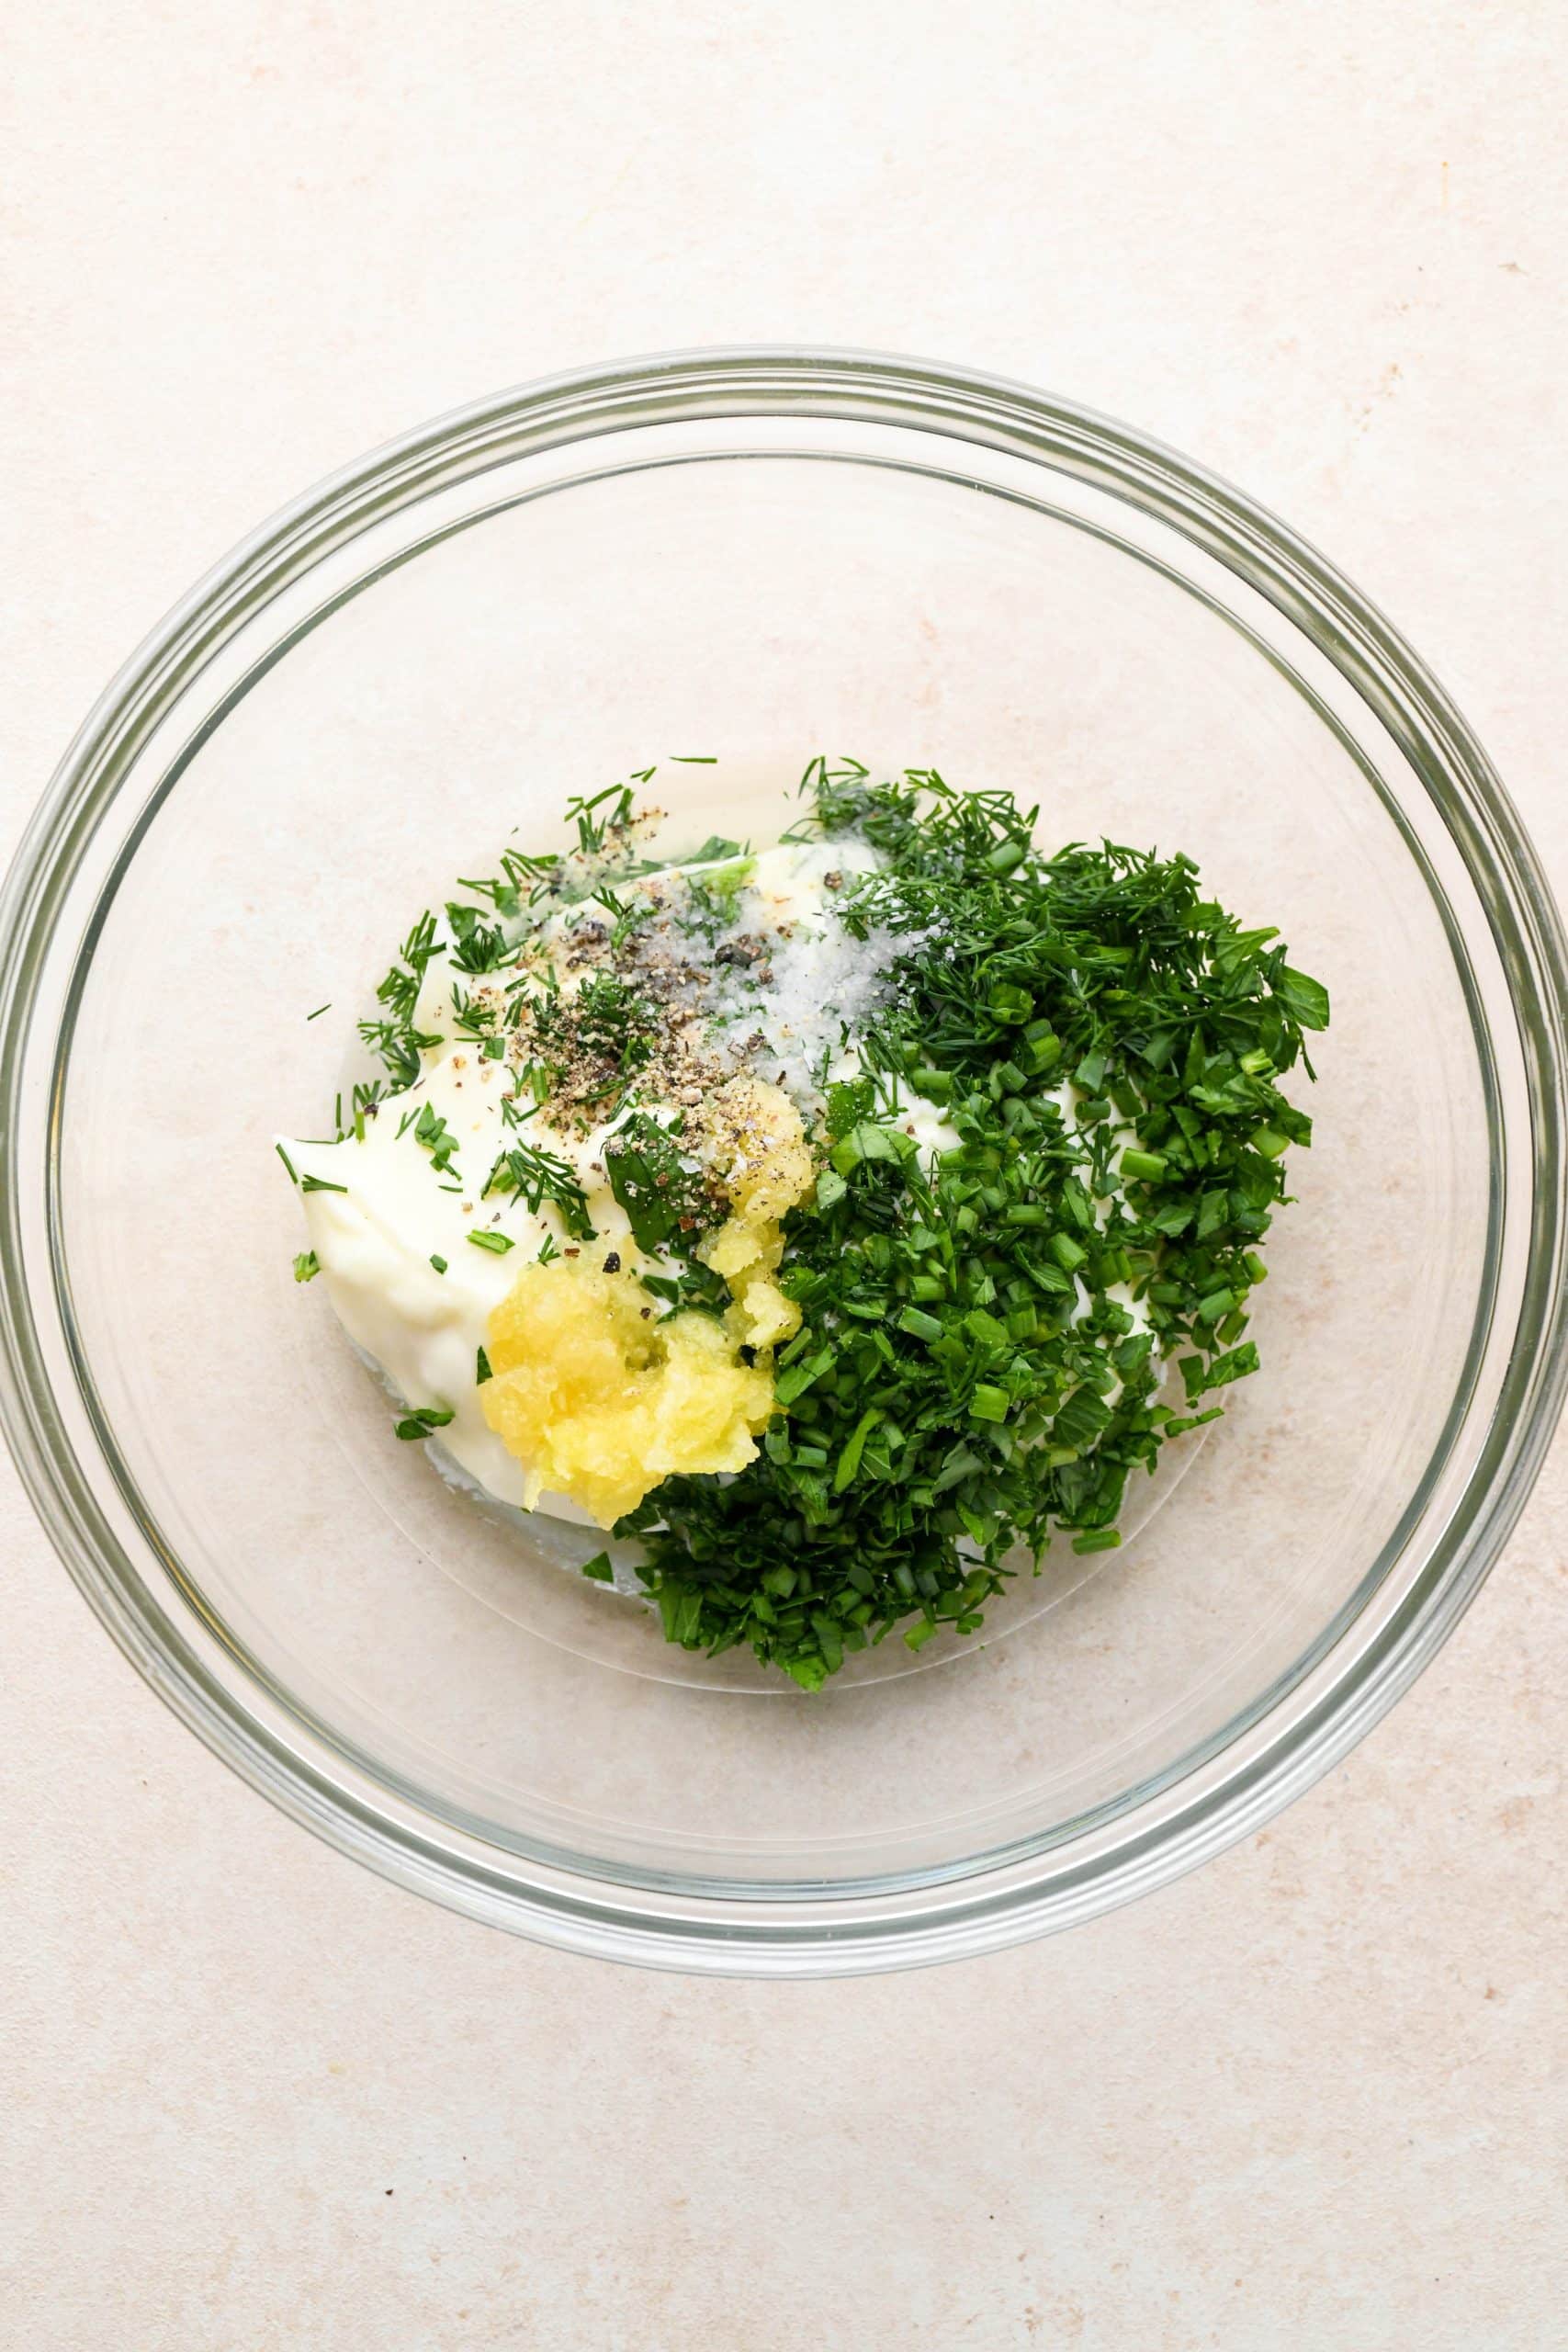 How to make Garlic Herb Aioli: Ingredients for aioli in a small glass bowl. 